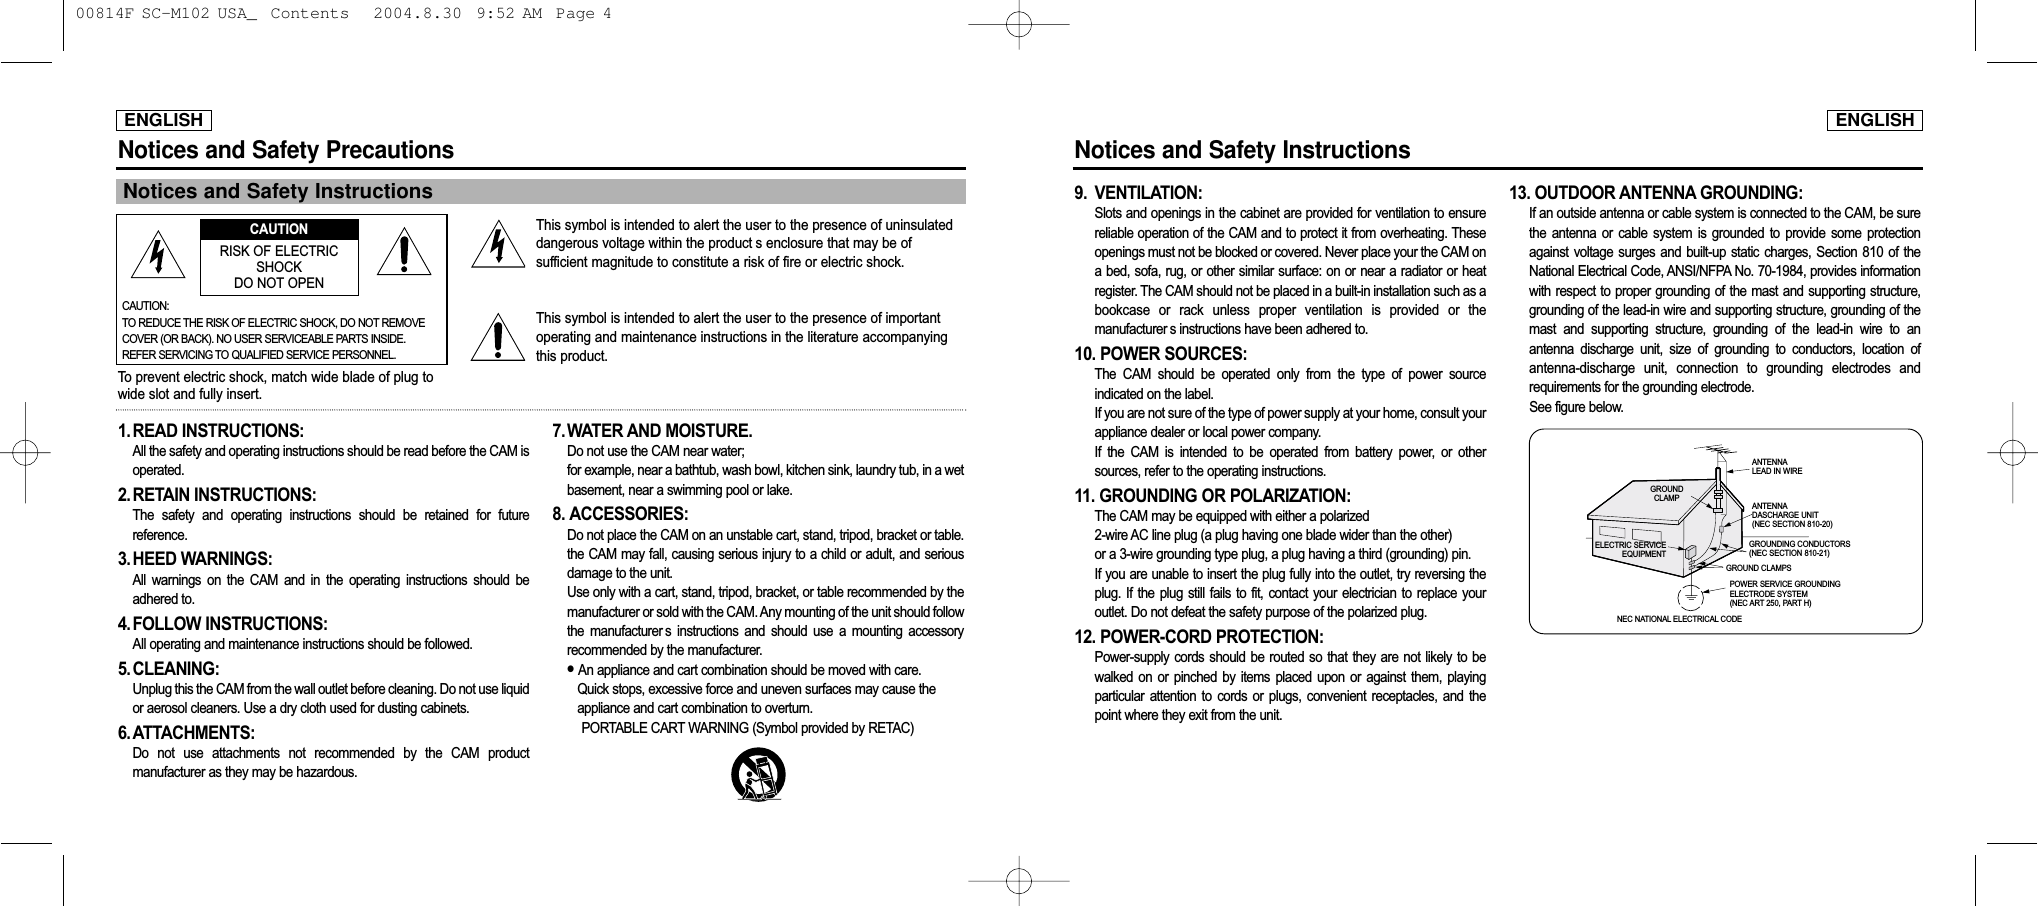 ENGLISHNotices and Safety Instructions9. VENTILATION:Slots and openings in the cabinet are provided for ventilation to ensurereliable operation of the CAM and to protect it from overheating. Theseopenings must not be blocked or covered. Never place your the CAM ona bed, sofa, rug, or other  similar  surface:  on or near a radiator or  heatregister. The CAM should not be placed in a built-in installation such as abookcase  or  rack  unless  proper  ventilation  is  provided  or  themanufacturer s instructions have been adhered to.10. POWER SOURCES: The  CAM  should  be  operated  only  from  the  type  of  power  sourceindicated on the label.If you are not sure of the type of power supply at your home, consult yourappliance dealer or local power company. If  the  CAM  is  intended  to  be  operated  from  battery  power,  or  othersources, refer to the operating instructions.11. GROUNDING OR POLARIZATION:The CAM may be equipped with either a polarized 2-wire AC line plug (a plug having one blade wider than the other) or a 3-wire grounding type plug, a plug having a third (grounding) pin.If you are unable to insert the plug fully into the outlet, try reversing theplug.  If  the  plug  still  fails  to  fit,  contact  your  electrician  to  replace  youroutlet. Do not defeat the safety purpose of the polarized plug.12. POWER-CORD PROTECTION:Power-supply  cords  should  be  routed so  that  they  are  not likely  to  bewalked  on  or  pinched  by  items  placed  upon  or  against  them,  playingparticular  attention  to  cords  or  plugs,  convenient  receptacles,  and  thepoint where they exit from the unit.13. OUTDOOR ANTENNA GROUNDING: If an outside antenna or cable system is connected to the CAM, be surethe  antenna  or  cable  system  is  grounded  to  provide  some  protectionagainst  voltage  surges  and  built-up  static  charges,  Section  810  of  theNational Electrical Code, ANSI/NFPA No. 70-1984, provides informationwith respect to proper grounding of the mast and supporting structure,grounding of the lead-in wire and supporting structure, grounding of themast  and  supporting  structure,  grounding  of  the  lead-in  wire  to  anantenna  discharge  unit,  size  of  grounding  to  conductors,  location  ofantenna-discharge  unit,  connection  to  grounding  electrodes  andrequirements for the grounding electrode. See figure below.ENGLISHNotices and Safety PrecautionsNotices and Safety Instructions1. READ INSTRUCTIONS: All the safety and operating instructions should be read before the CAM isoperated.2. RETAIN INSTRUCTIONS: The  safety  and  operating  instructions  should  be  retained  for  futurereference.3. HEED WARNINGS:All  warnings  on  the  CAM  and  in  the  operating  instructions  should  beadhered to.4. FOLLOW INSTRUCTIONS:All operating and maintenance instructions should be followed.5. CLEANING:Unplug this the CAM from the wall outlet before cleaning. Do not use liquidor aerosol cleaners. Use a dry cloth used for dusting cabinets.6. ATTACHMENTS: Do  not  use  attachments  not  recommended  by  the  CAM  productmanufacturer as they may be hazardous.7. WATER AND MOISTURE.Do not use the CAM near water; for example, near a bathtub, wash bowl, kitchen sink, laundry tub, in a wetbasement, near a swimming pool or lake.8. ACCESSORIES: Do not place the CAM on an unstable cart, stand, tripod, bracket or table.the CAM may fall, causing serious injury to  a child or adult, and seriousdamage to the unit.Use only with a cart, stand, tripod, bracket, or table recommended by themanufacturer or sold with the CAM. Any mounting of the unit should followthe  manufacturer s  instructions  and  should  use  a  mounting  accessoryrecommended by the manufacturer.●An appliance and cart combination should be moved with care. Quick stops, excessive force and uneven surfaces may cause the appliance and cart combination to overturn.PORTABLE CART WARNING (Symbol provided by RETAC)This symbol is intended to alert the user to the presence of uninsulateddangerous voltage within the product s enclosure that may be ofsufficient magnitude to constitute a risk of fire or electric shock.This symbol is intended to alert the user to the presence of importantoperating and maintenance instructions in the literature accompanyingthis product.To prevent electric shock, match wide blade of plug towide slot and fully insert.CAUTIONRISK OF ELECTRICSHOCKDO NOT OPENCAUTION:TO REDUCE THE RISK OF ELECTRIC SHOCK, DO NOT REMOVECOVER (OR BACK). NO USER SERVICEABLE PARTS INSIDE.REFER SERVICING TO QUALIFIED SERVICE PERSONNEL.ELECTRIC SERVICEEQUIPMENTGROUNDCLAMPANTENNALEAD IN WIREANTENNADASCHARGE UNIT(NEC SECTION 810-20)GROUNDING CONDUCTORS(NEC SECTION 810-21)GROUND CLAMPSPOWER SERVICE GROUNDINGELECTRODE SYSTEM(NEC ART 250, PART H)NEC NATIONAL ELECTRICAL CODE 00814F SC-M102 USA_  Contents   2004.8.30  9:52 AM  Page 4